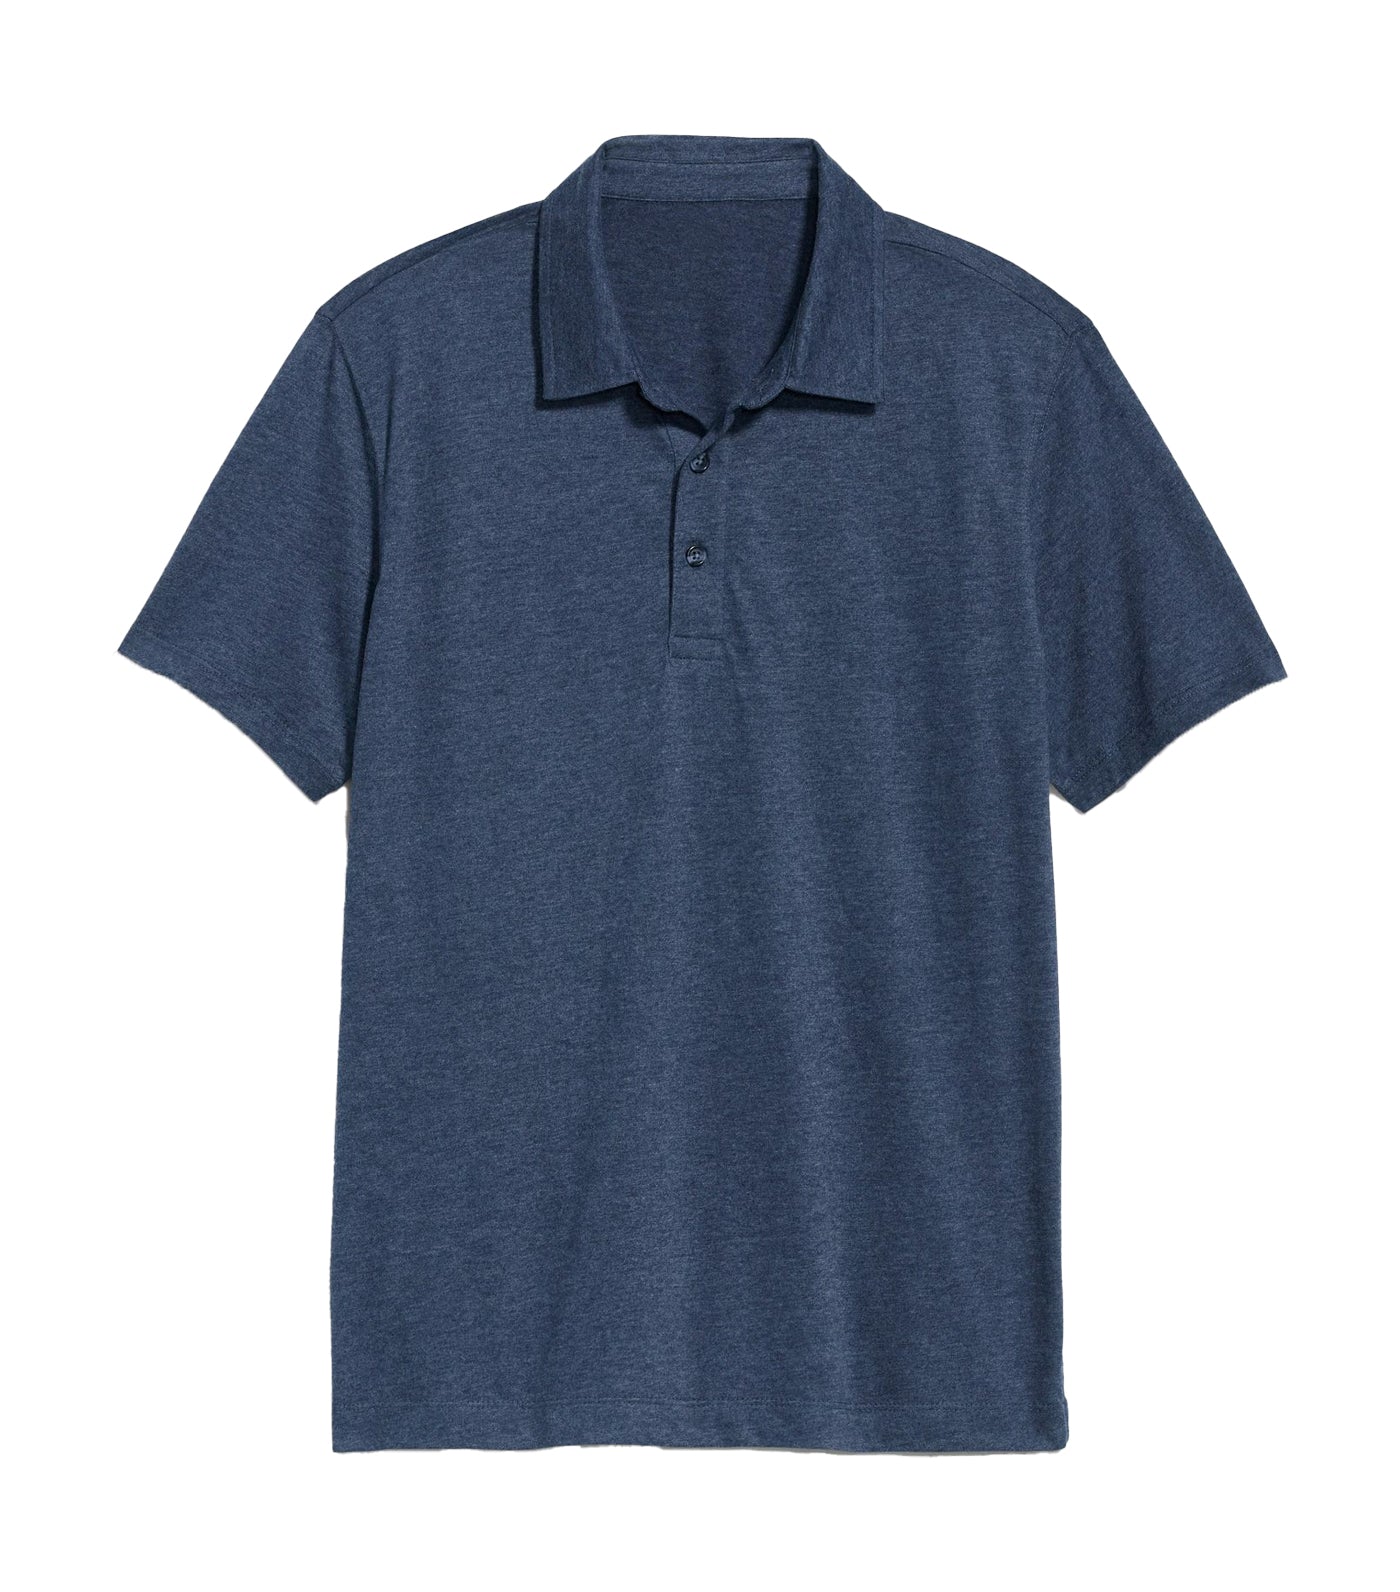 Soft-Washed Short Sleeve Polo Shirt for Men Obscure Night